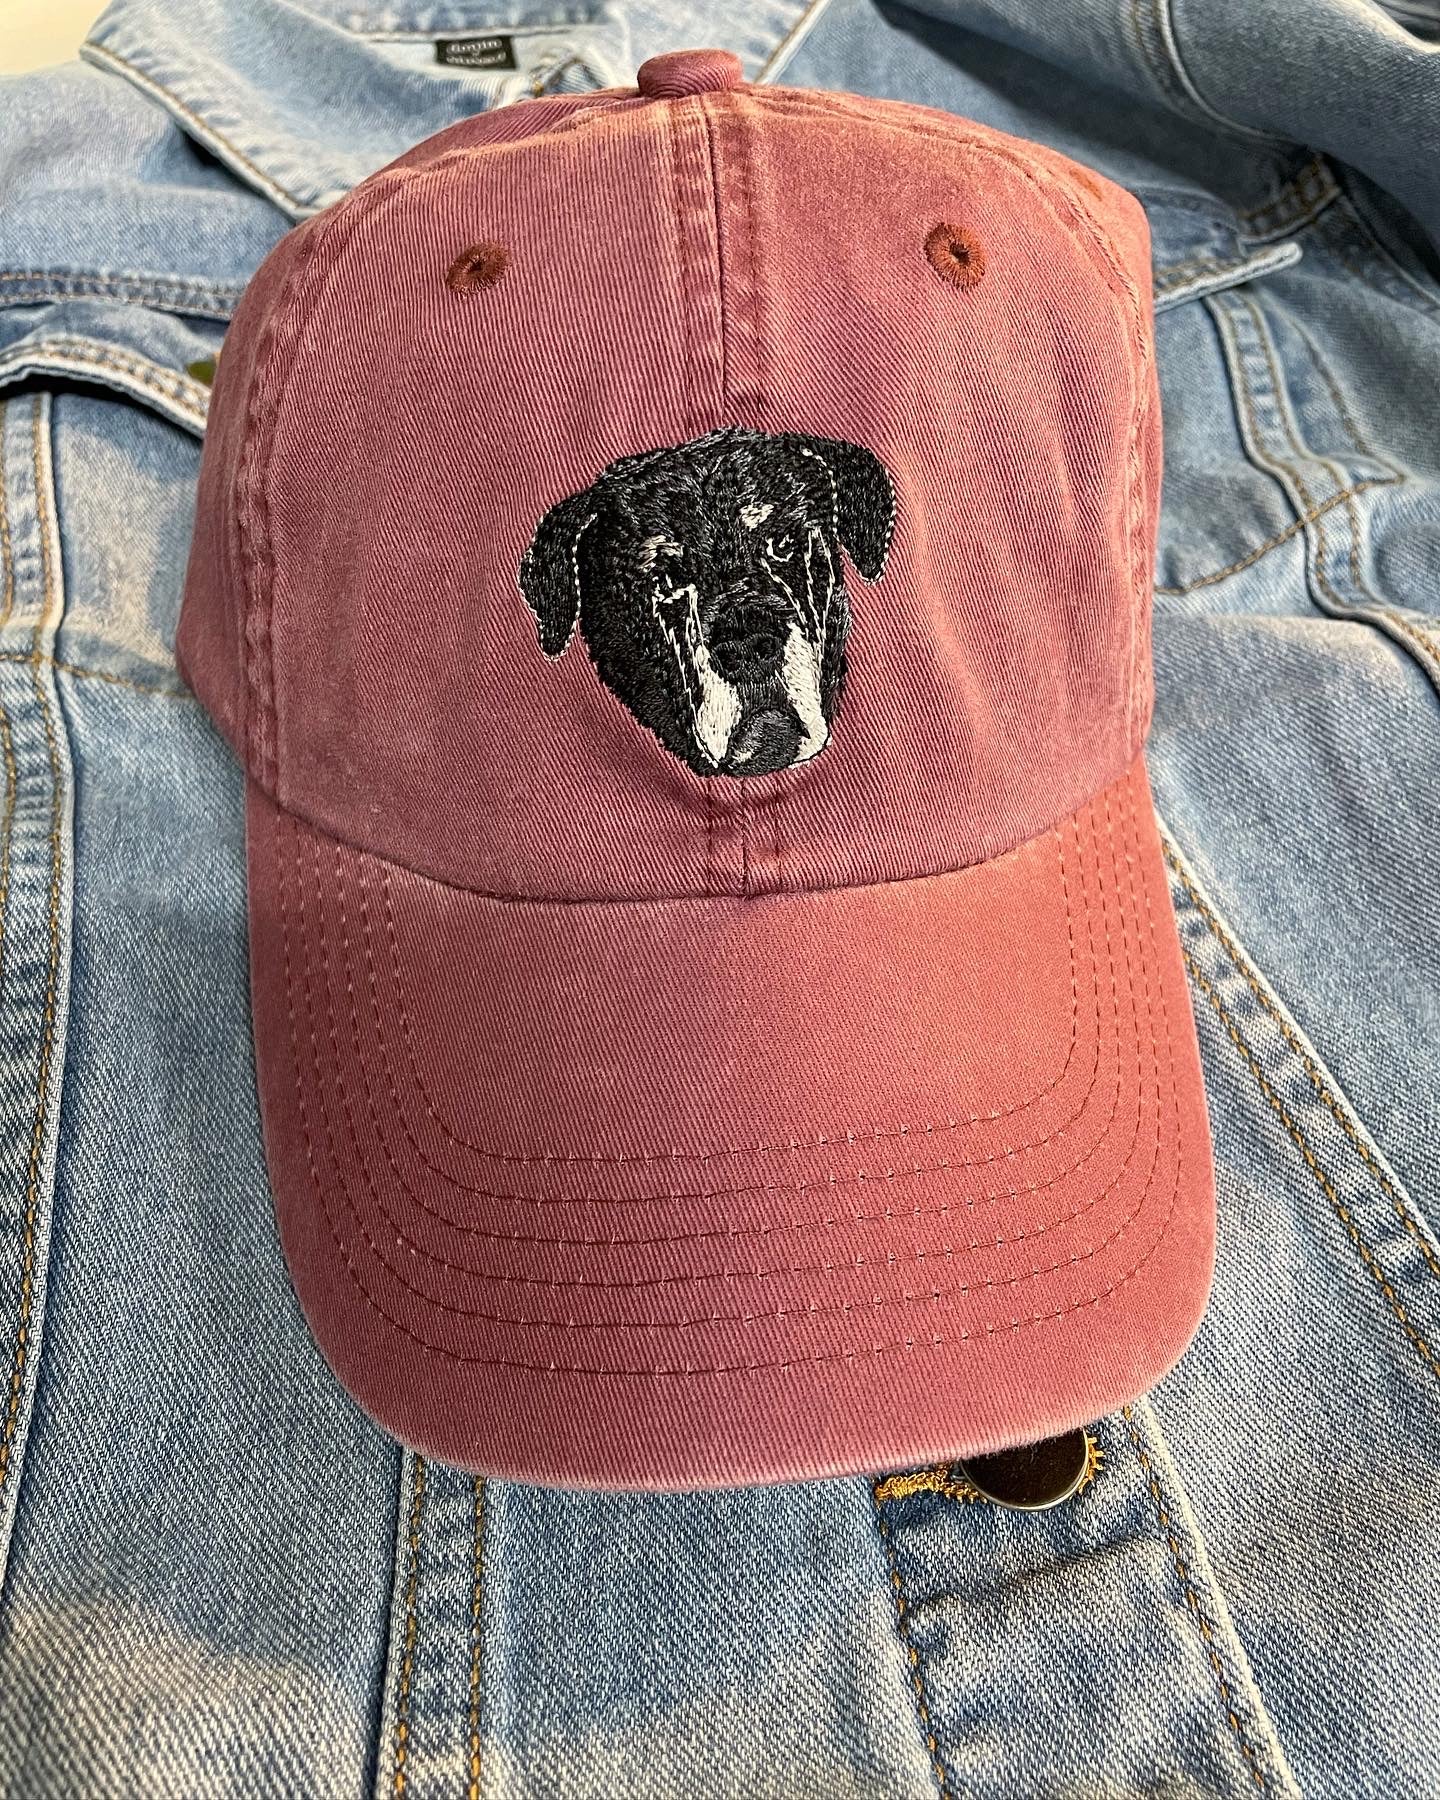 Your Pet on Hat